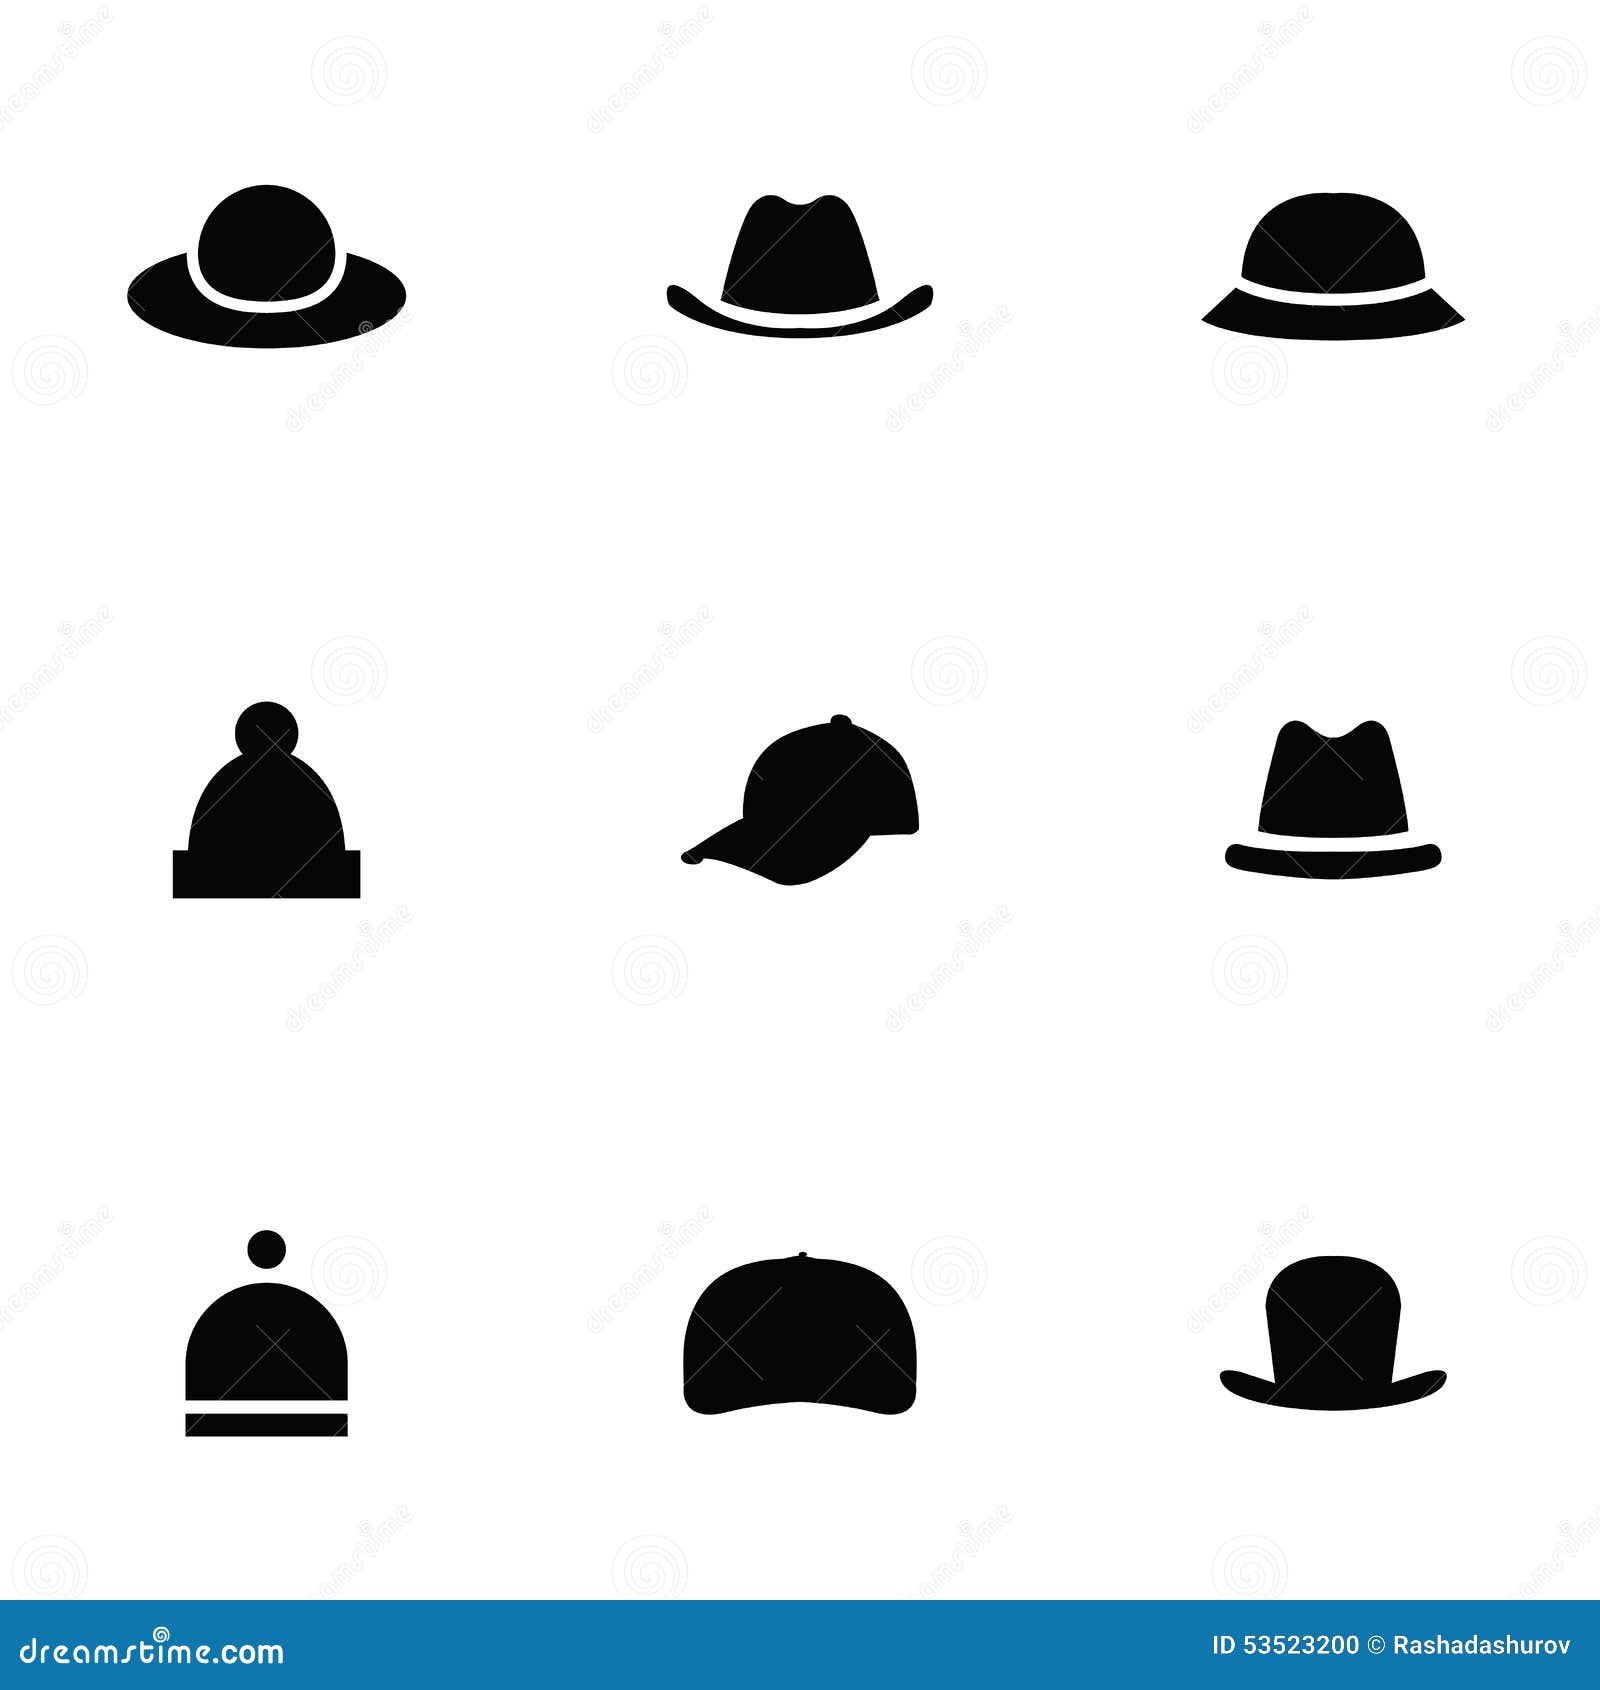 Hats 9 icons set stock vector. Illustration of background - 53523200